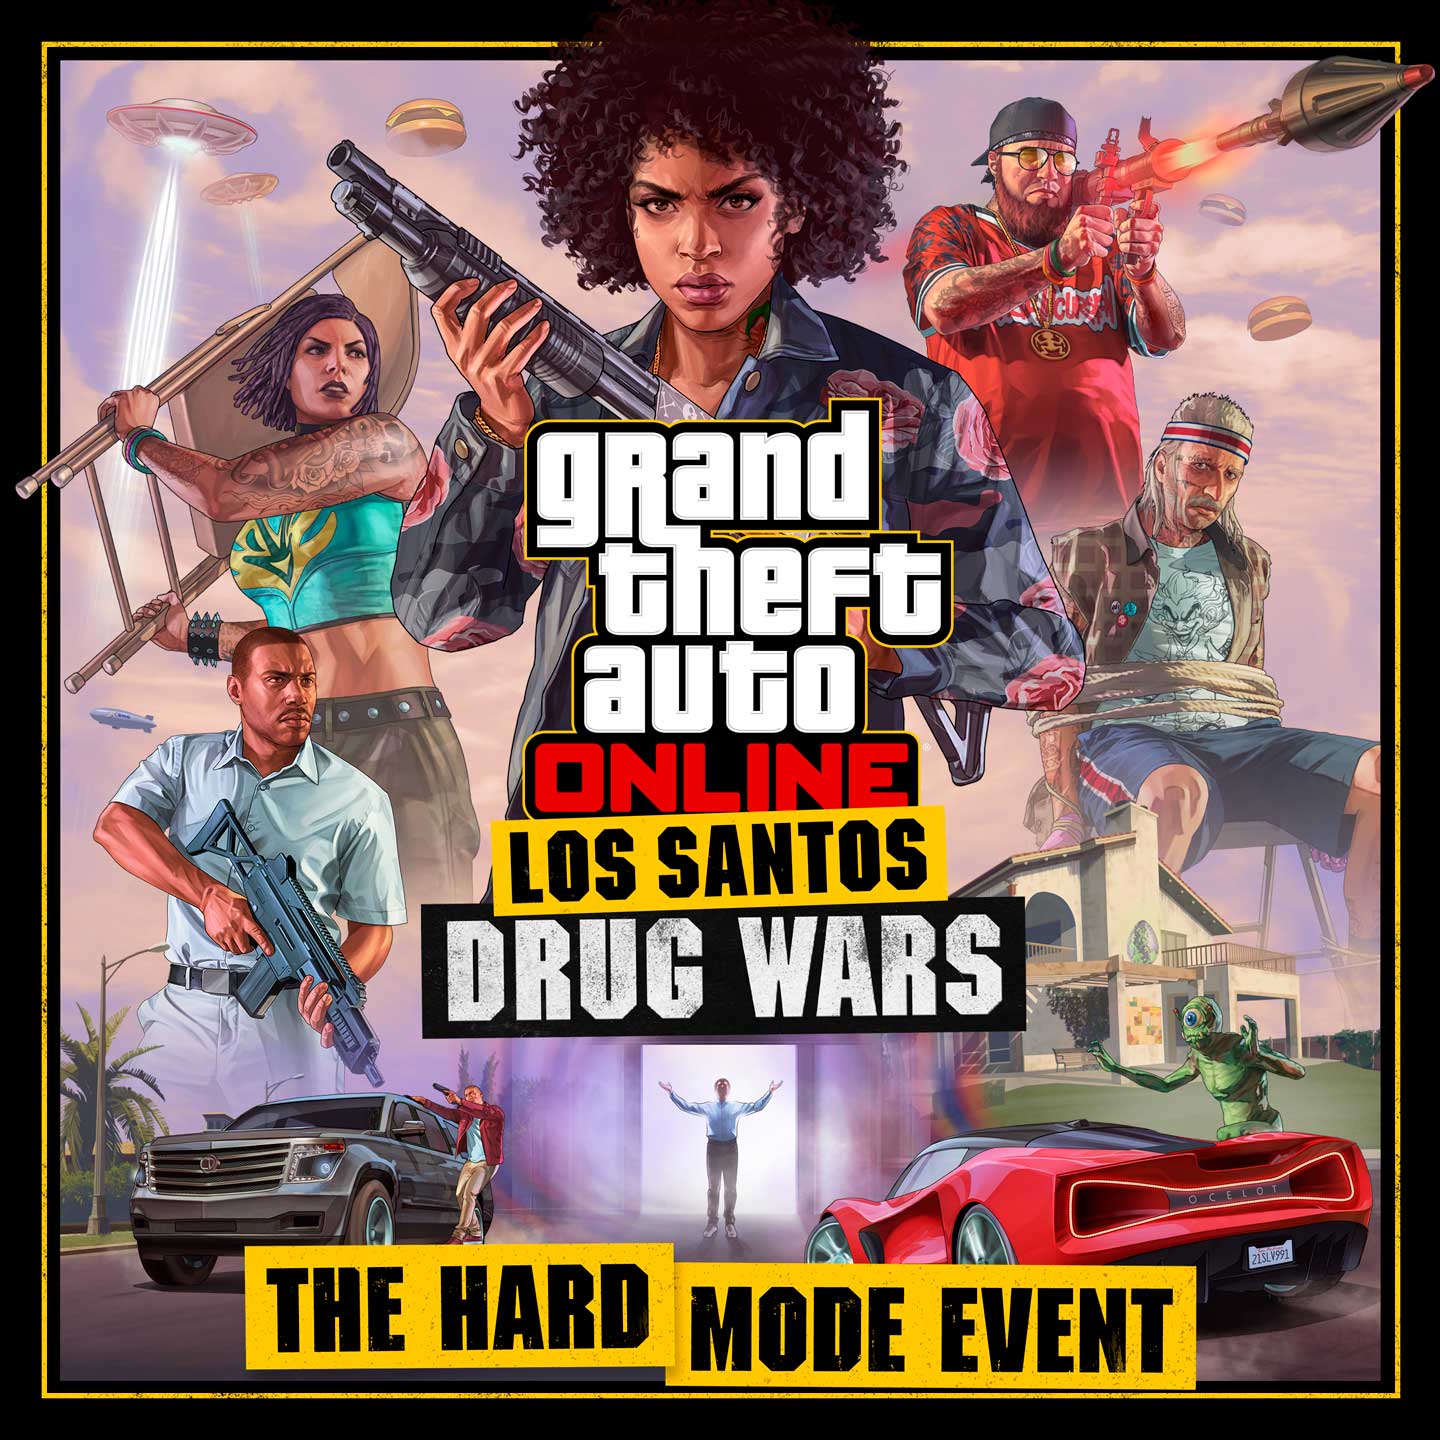 Rare Items Up for Grabs in The Last Dose Hard Mode Event